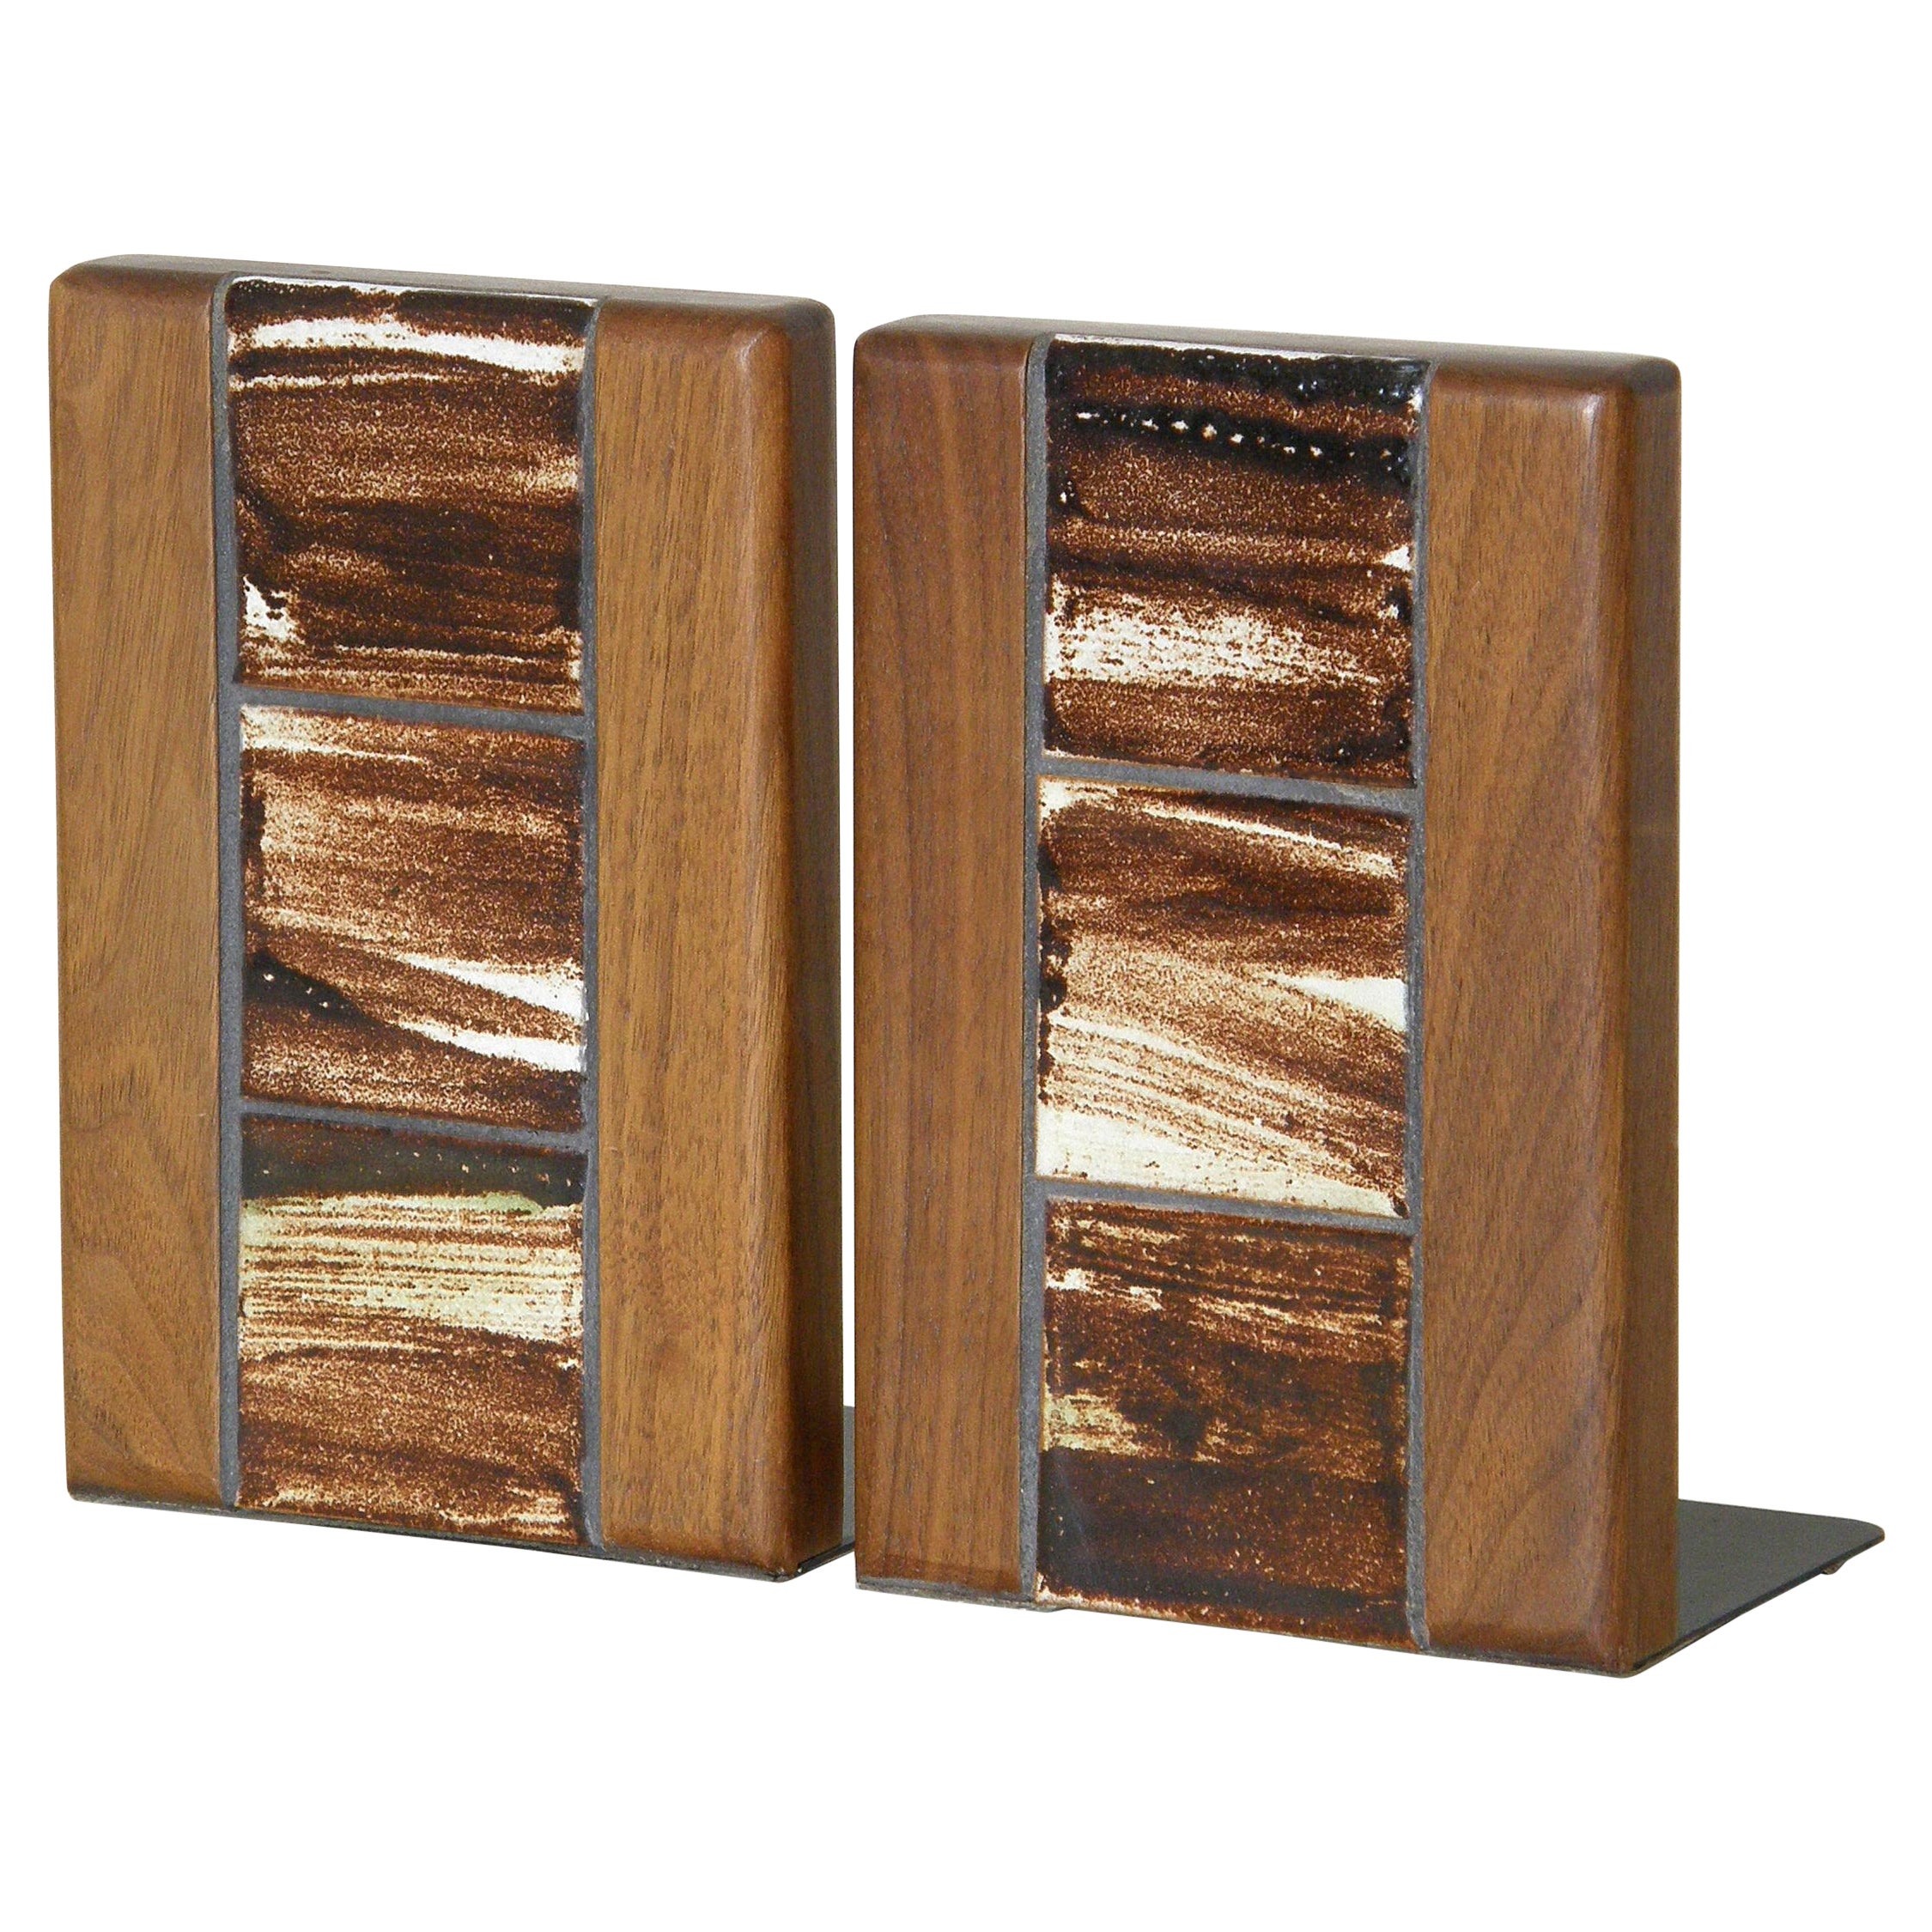 Jane and Gordon Martz Ceramic Tile and Walnut Bookends for Marshall Studios For Sale